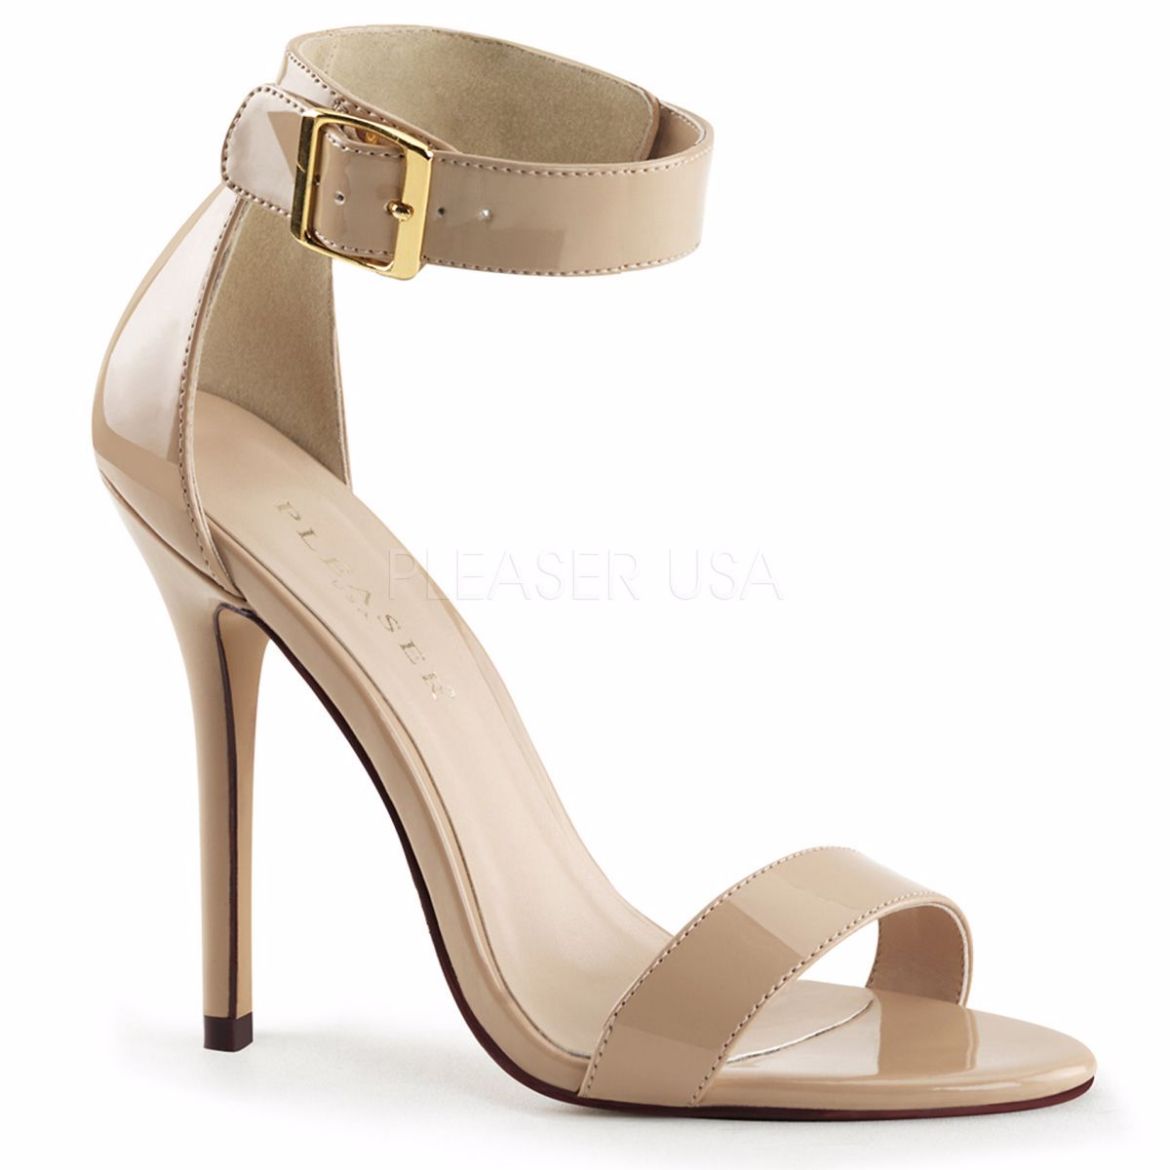 Product image of Pleaser Amuse-10 Cream Patent, 5 inch (12.7 cm) Heel, Sandal Shoes